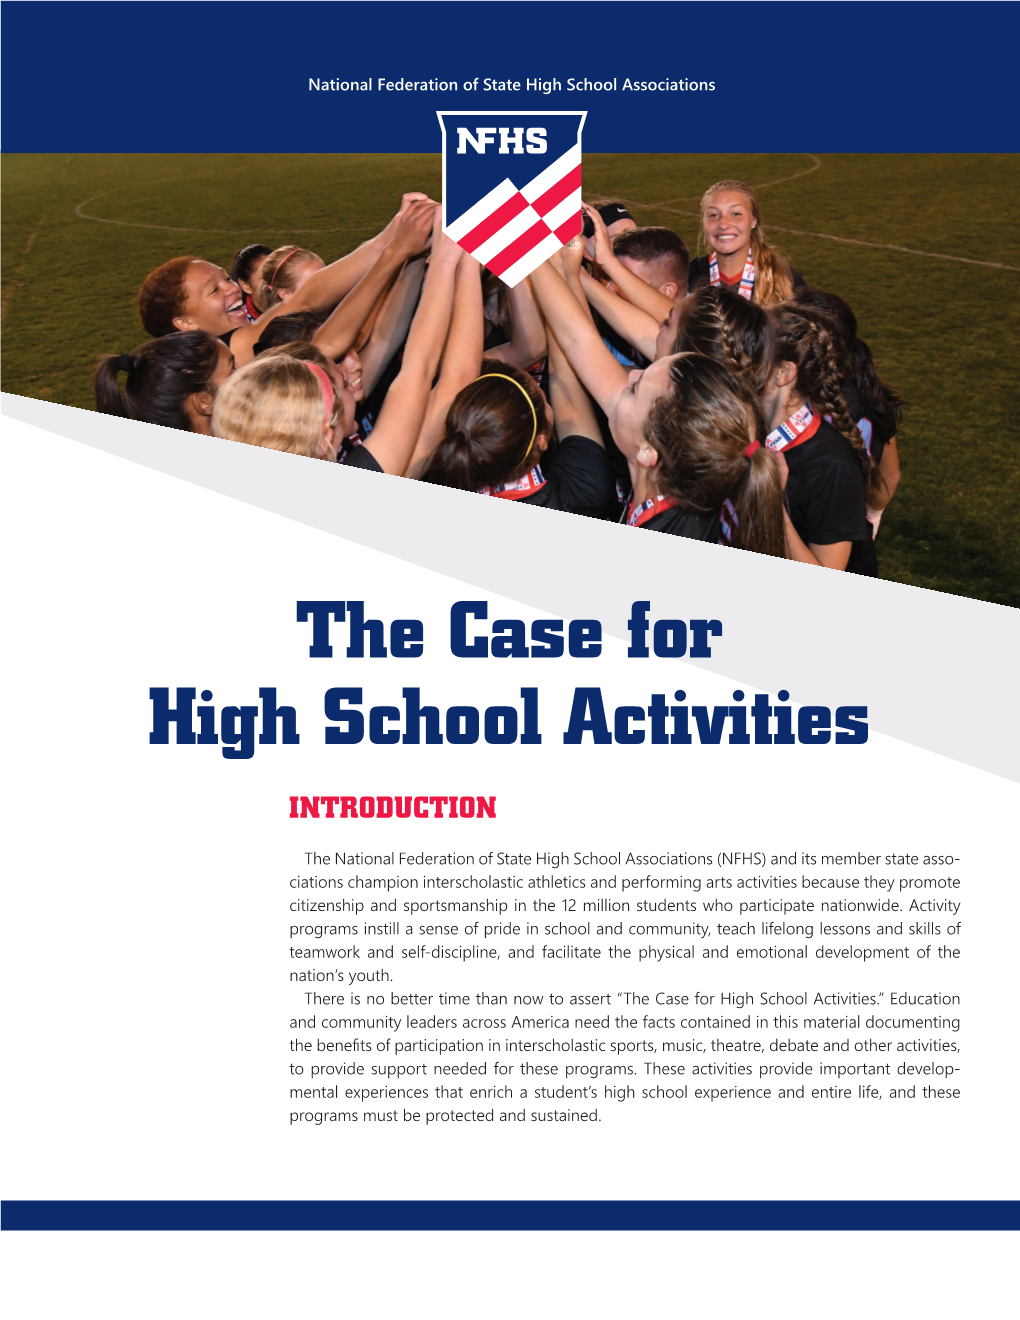 The Case for High School Activities Booklet